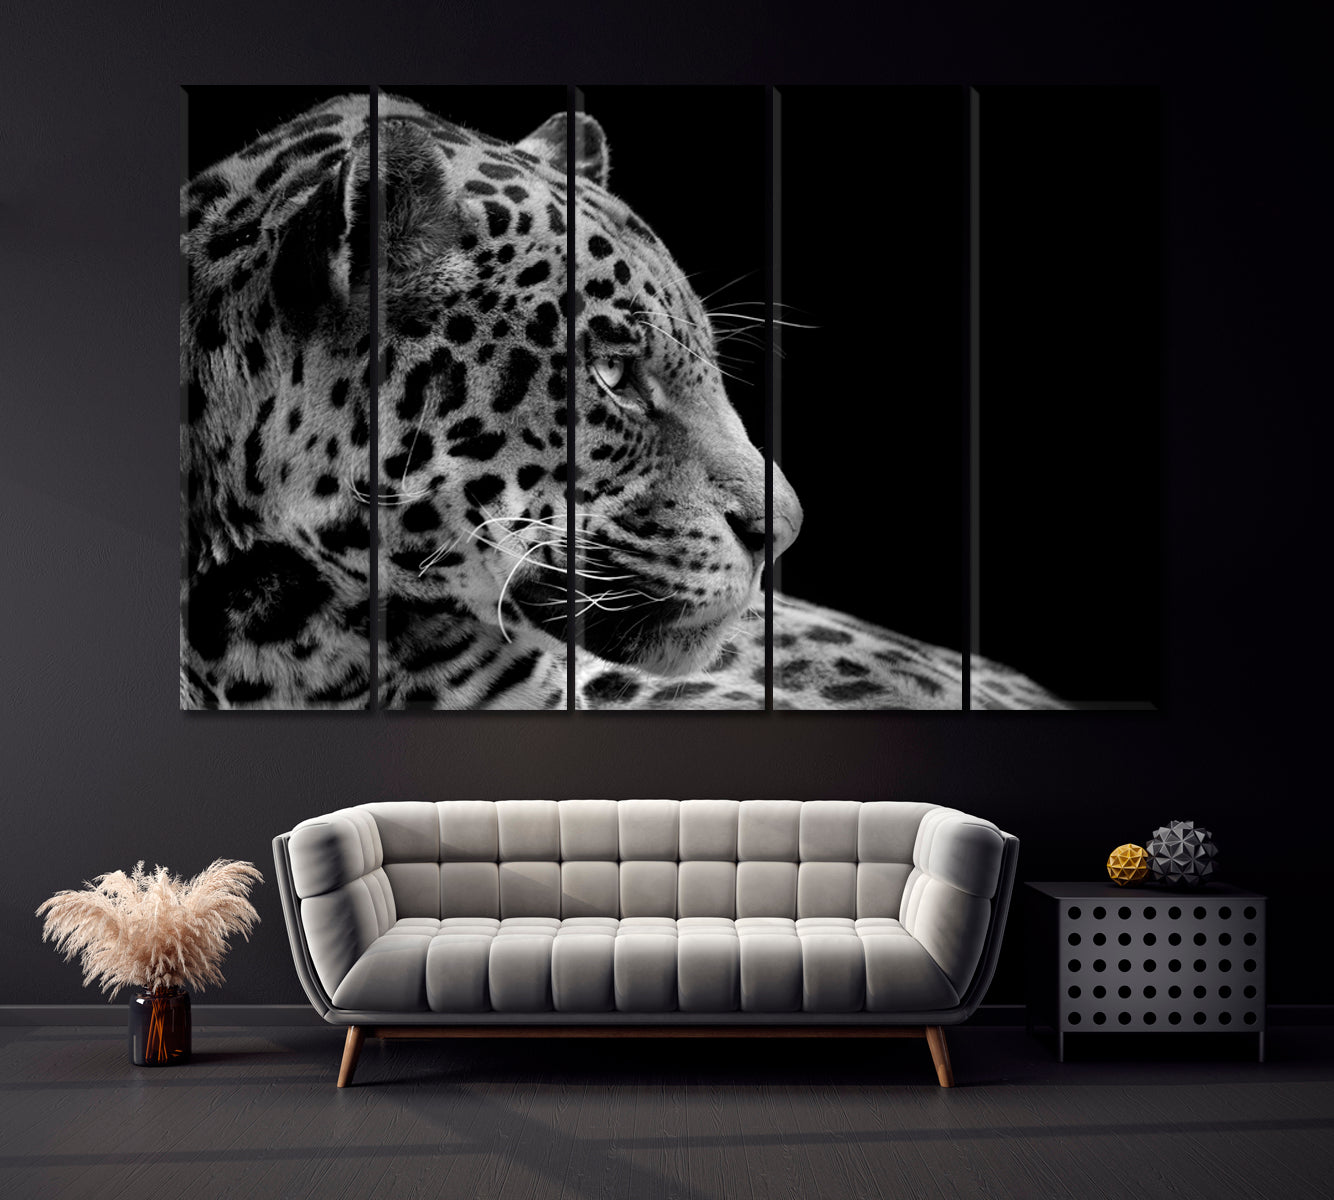 Jaguar in Black and White Canvas Print ArtLexy 5 Panels 36"x24" inches 